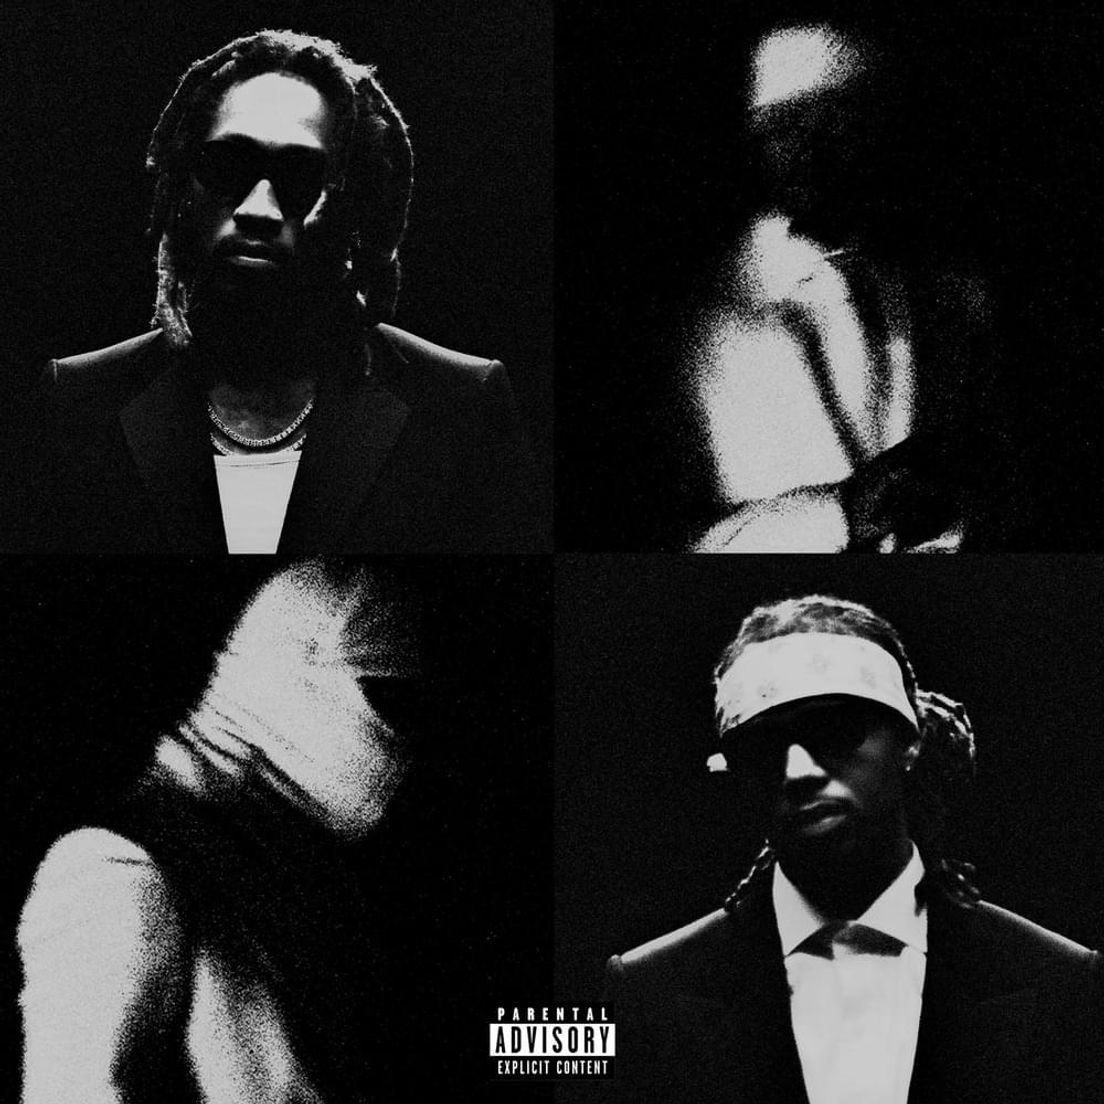 Cover of the album &quot;Business Is Business&quot; by Young Thug. The image has four distorted black-and-white portraits, featuring Young Thug in different artistic, obscured poses